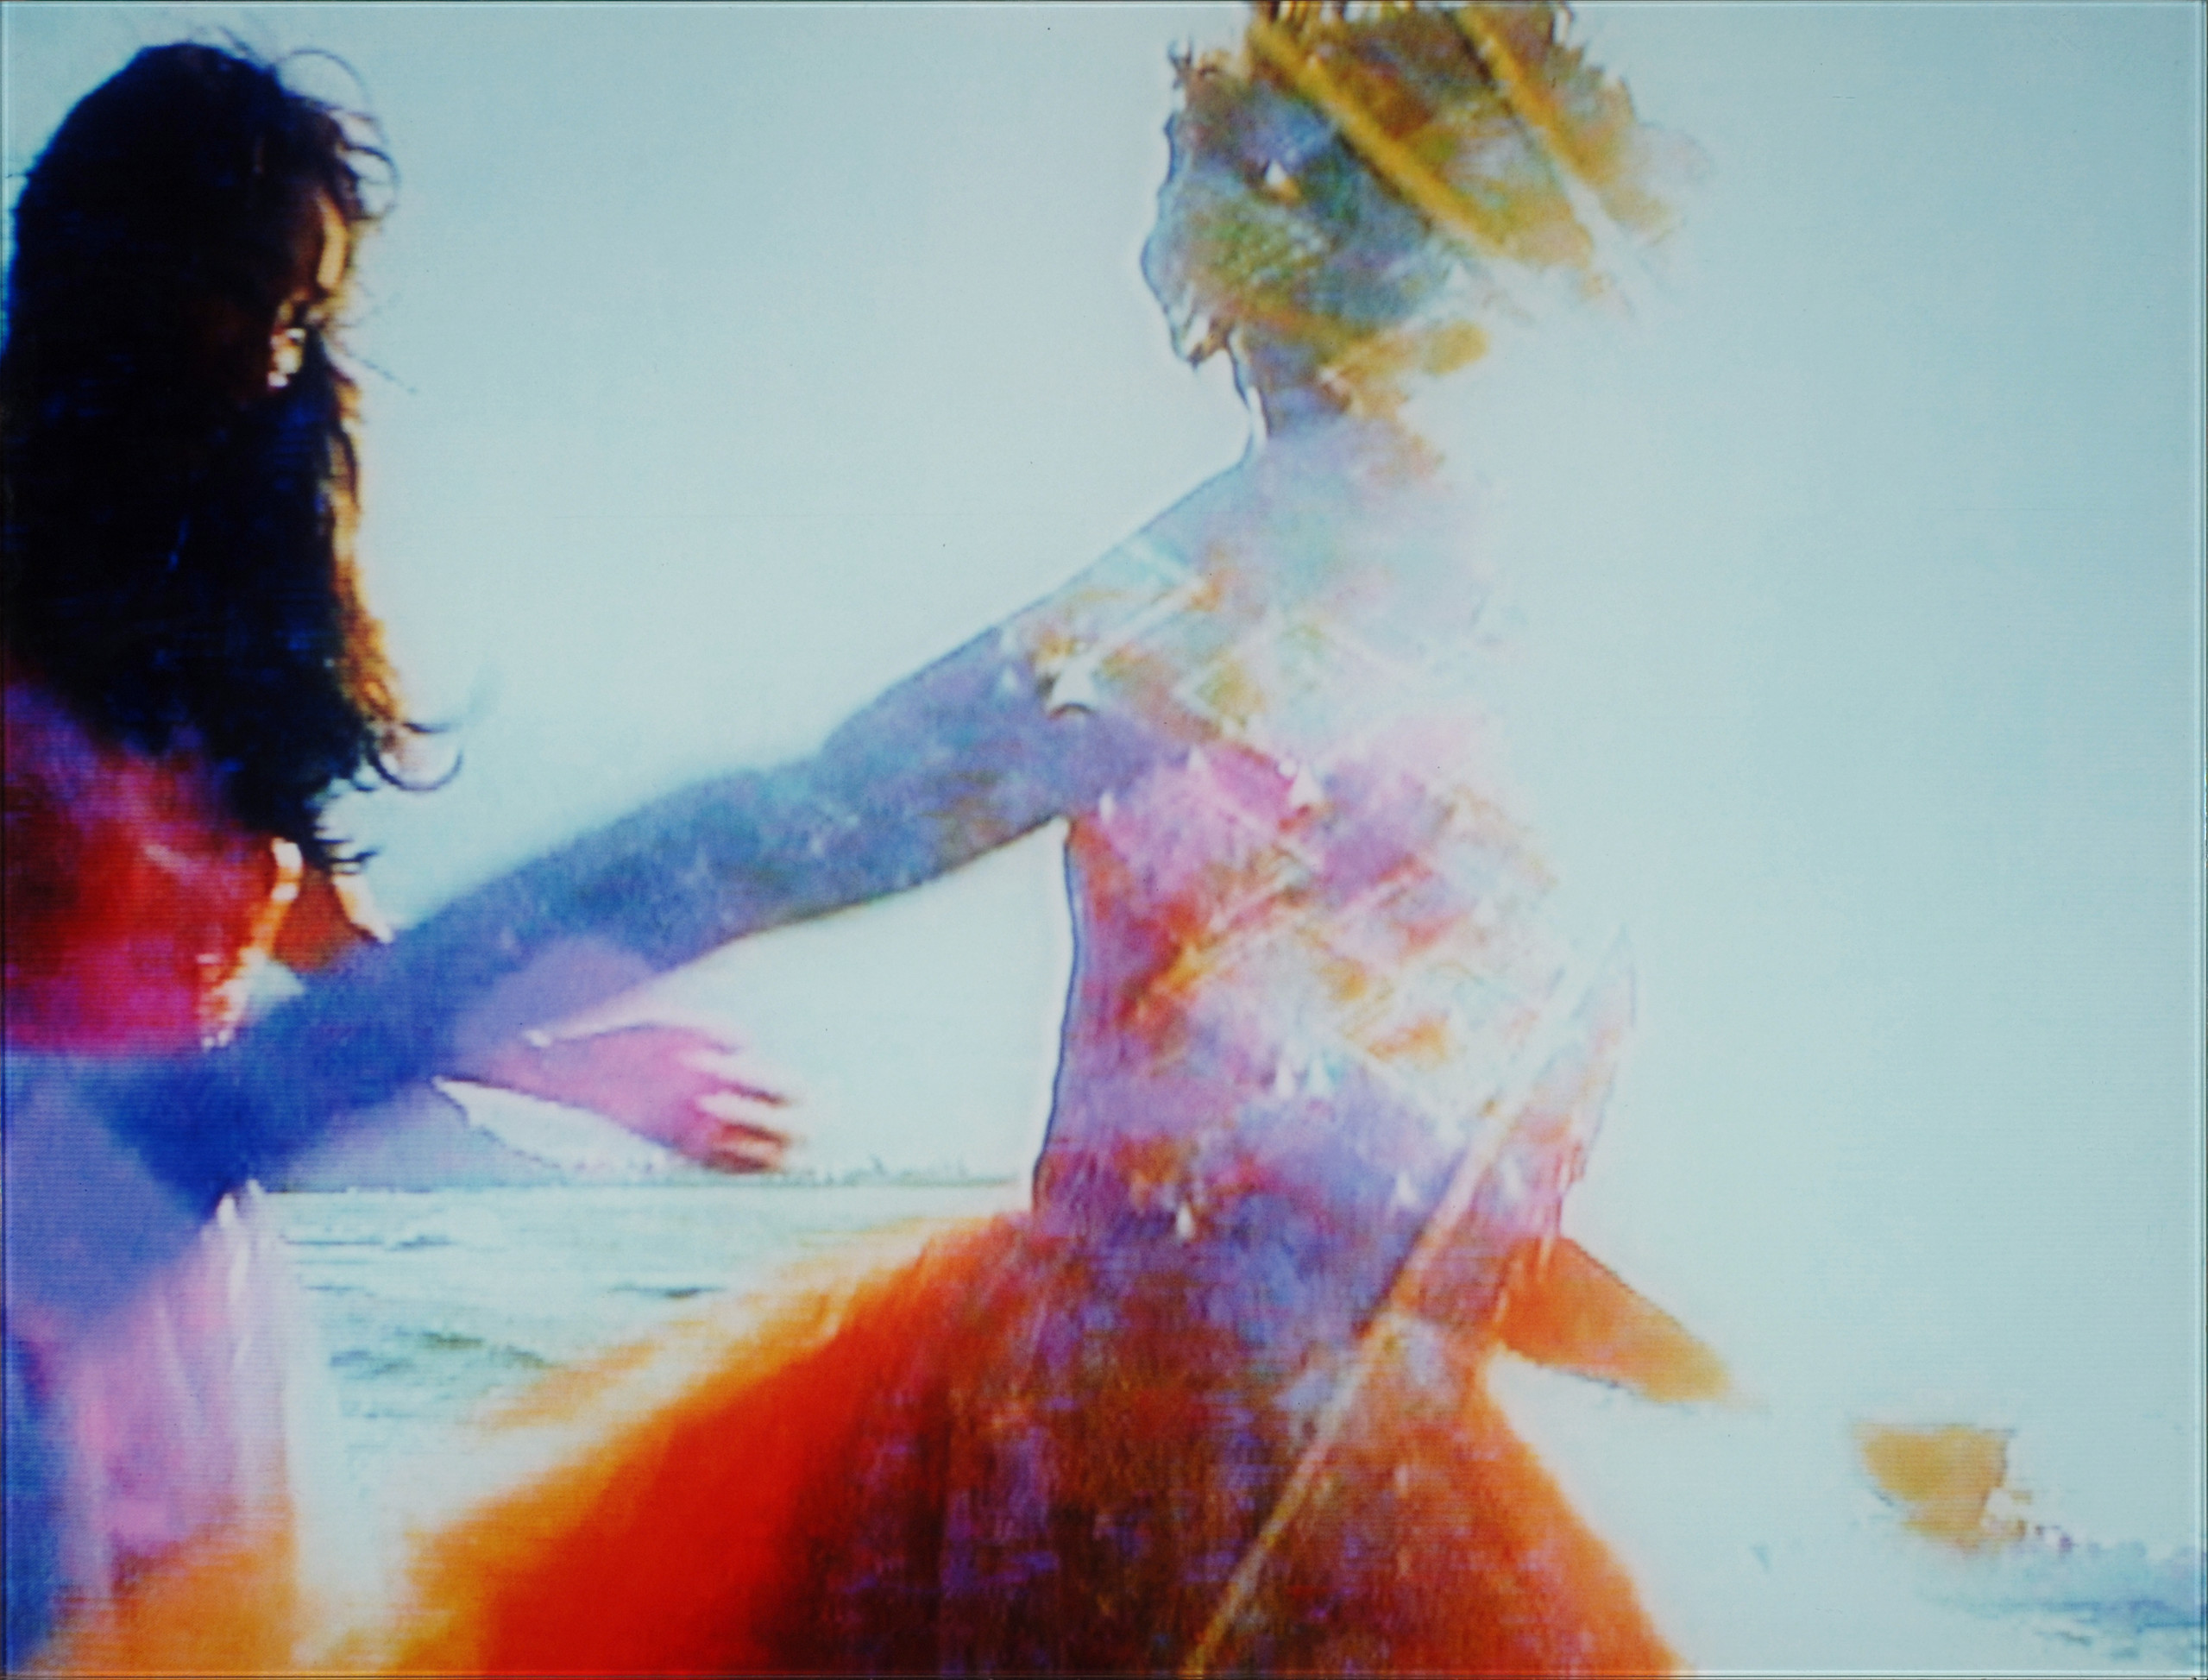 A screen still of a video that features the figures of two women, one with short blonde hair, one with long brown hair, in motion. They are slightly pixelated/abstract. The contrast is high and particulars of the image are washed out. There is perhaps an oceanside mountain and the sea in the background.